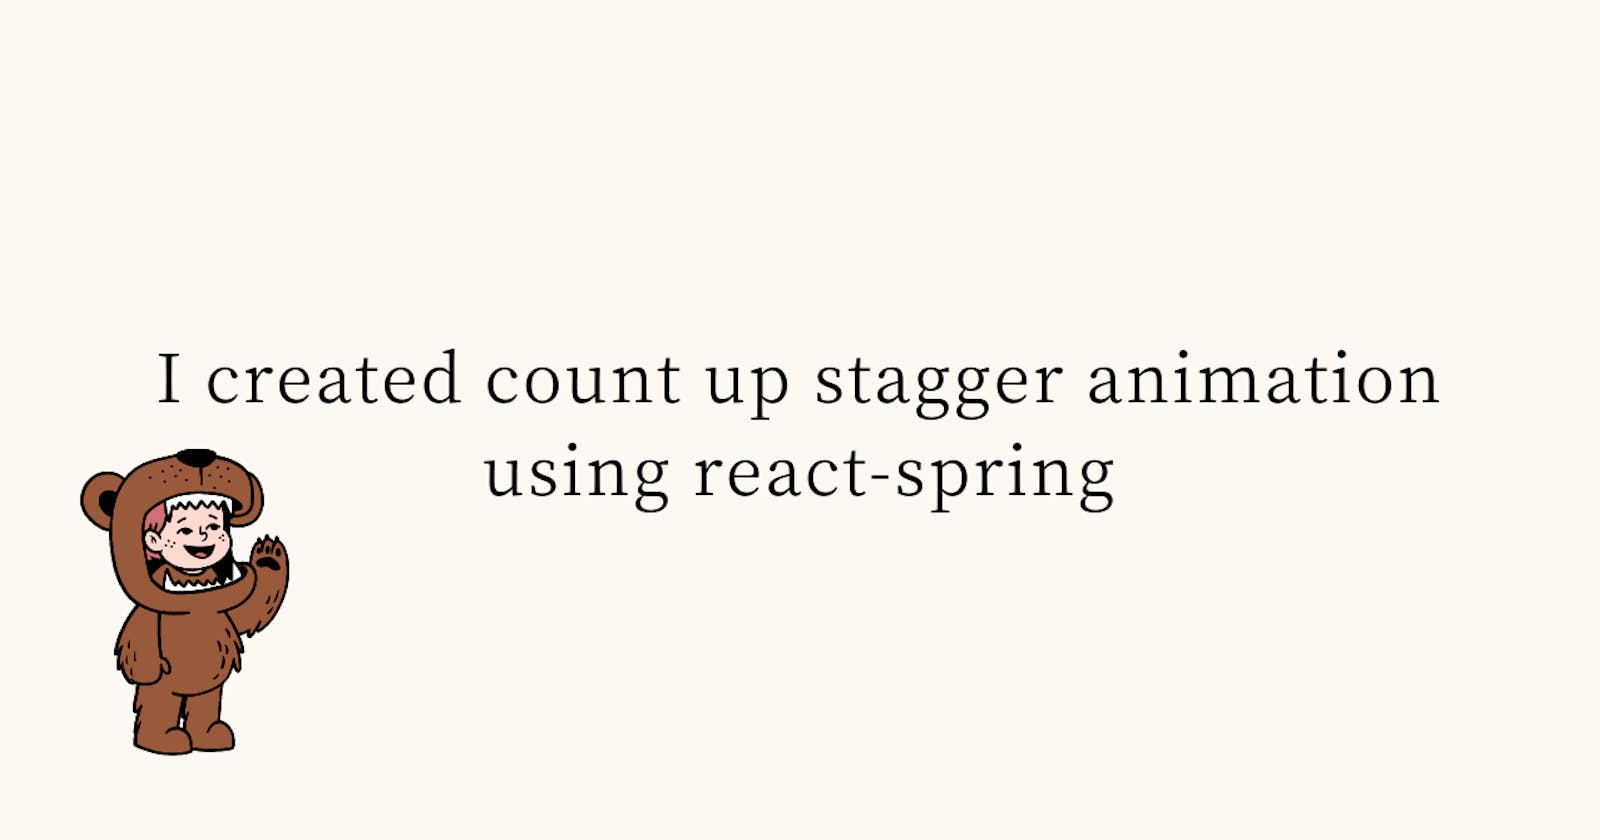 I created count up stagger animation using react-spring